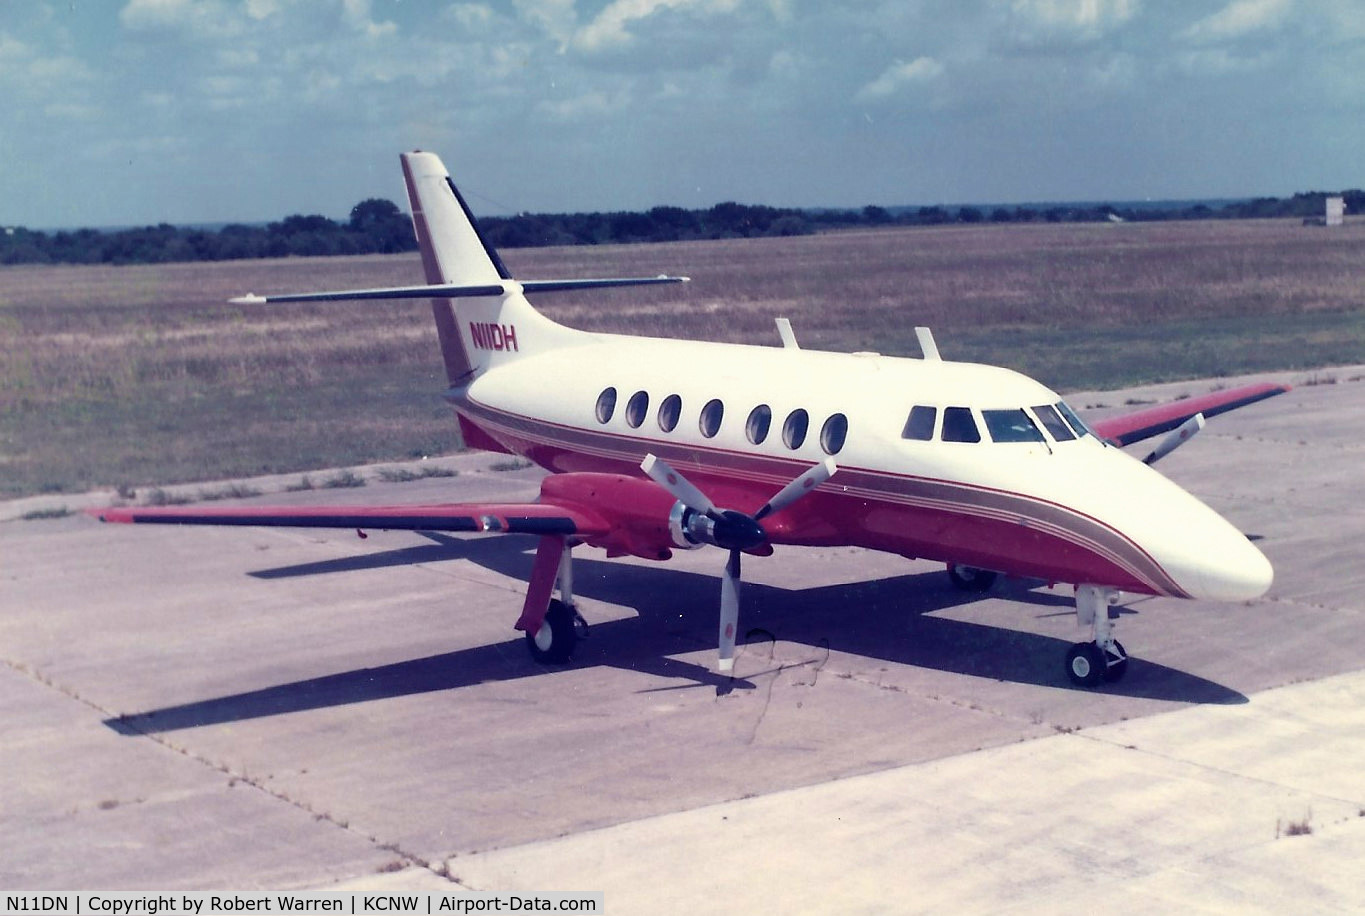 N11DN, 1968 Handley Page HP-137 MK1 C/N 204, Note tail number N11DH. This was changed to N11DN after aircraft was acquired by Jetstream, Inc. from previous owner, Doyle Hopkins. Original Astazou engines were still installed at time of photo, ca. 1975.